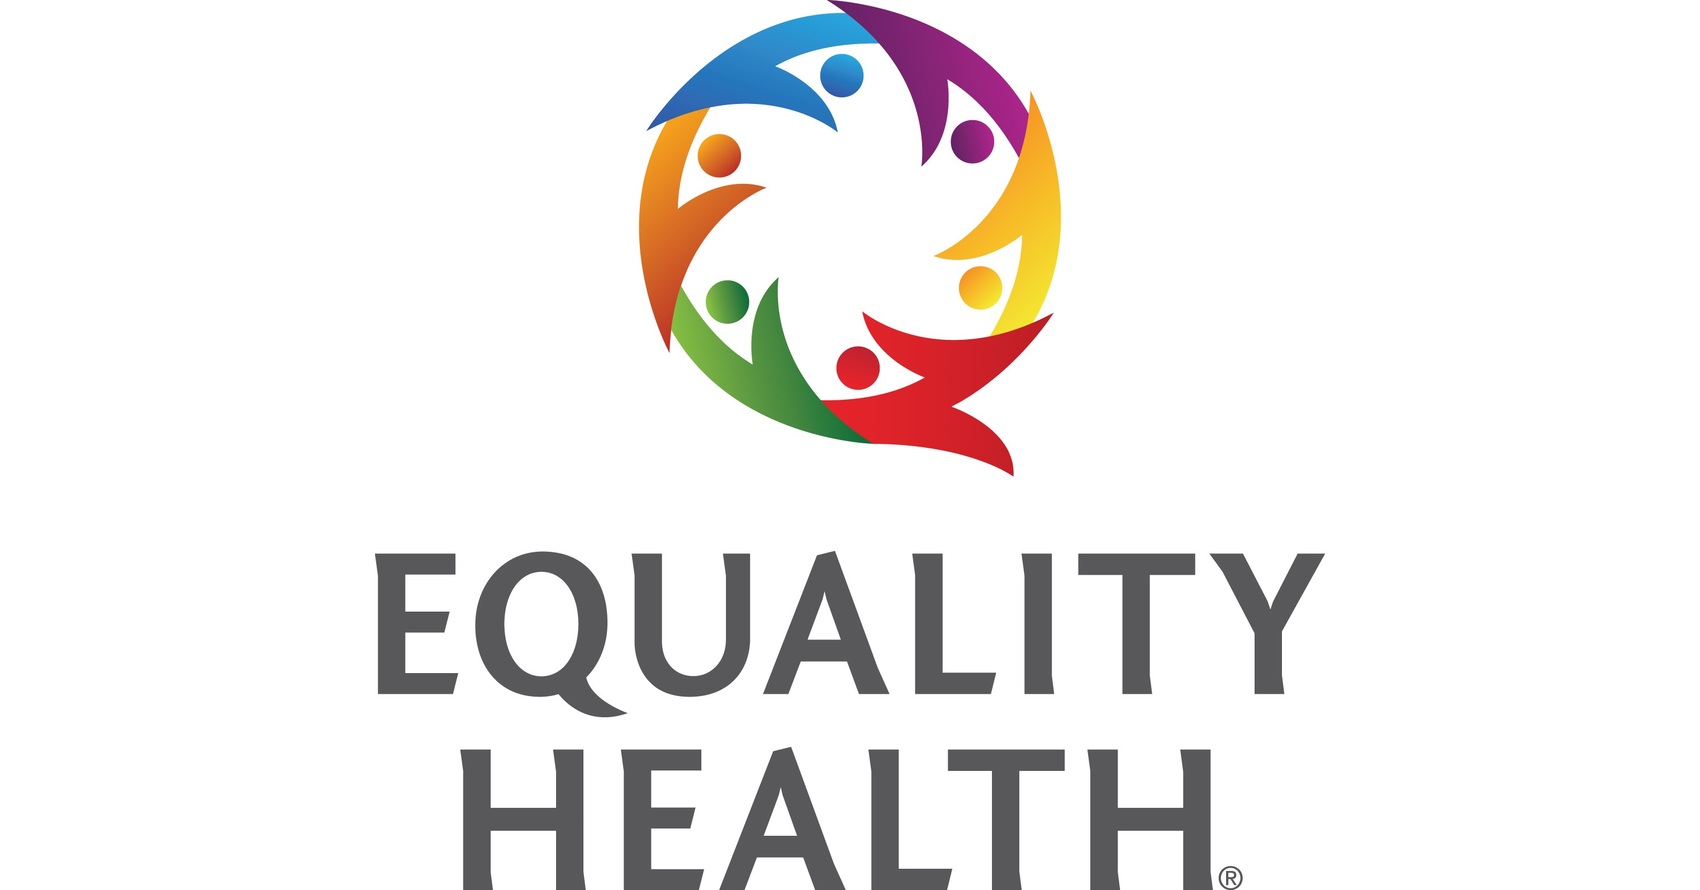 Equality Health Partners with Three HIEs to Improve Care Coordination for Healthcare Providers